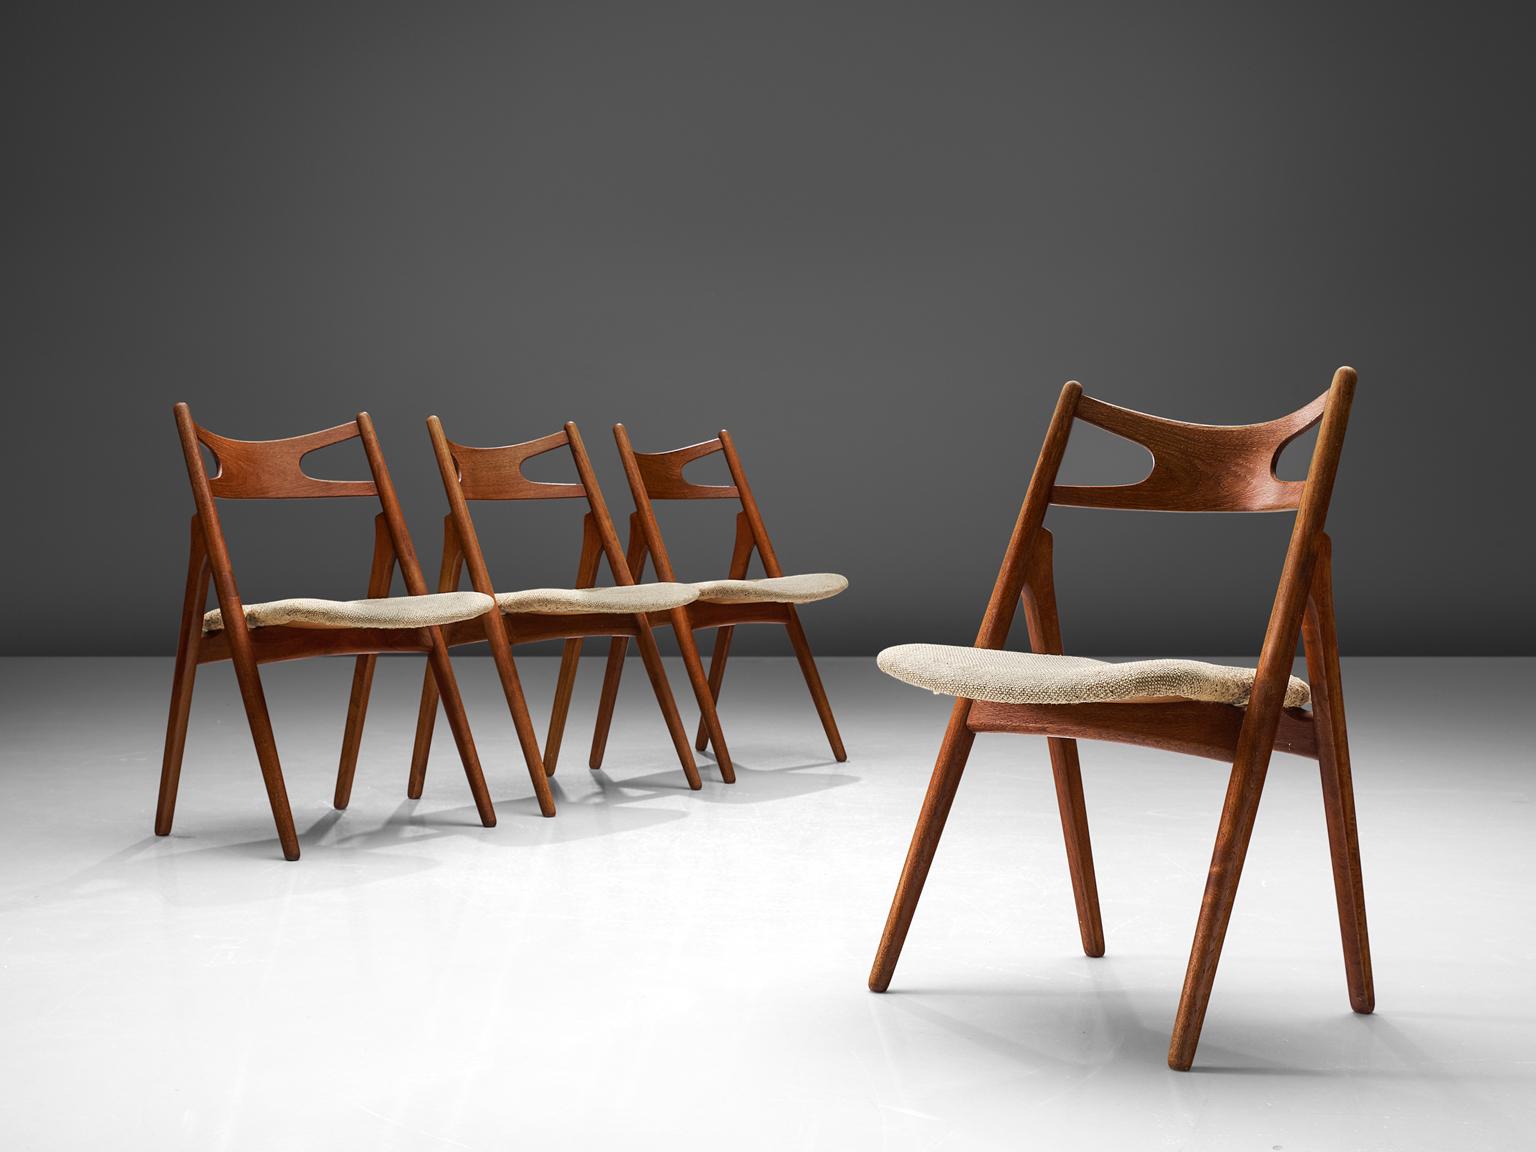 Hans J. Wegner for Carl Hansen & Søn, set of 2 'Sawbuck' CH29 chairs, teak, Denmark, 1952.

This set of chairs is designed by Hans J. Wegner for Carl Hansen. This chair holds a very strong construction even though it has a simplistic design. The